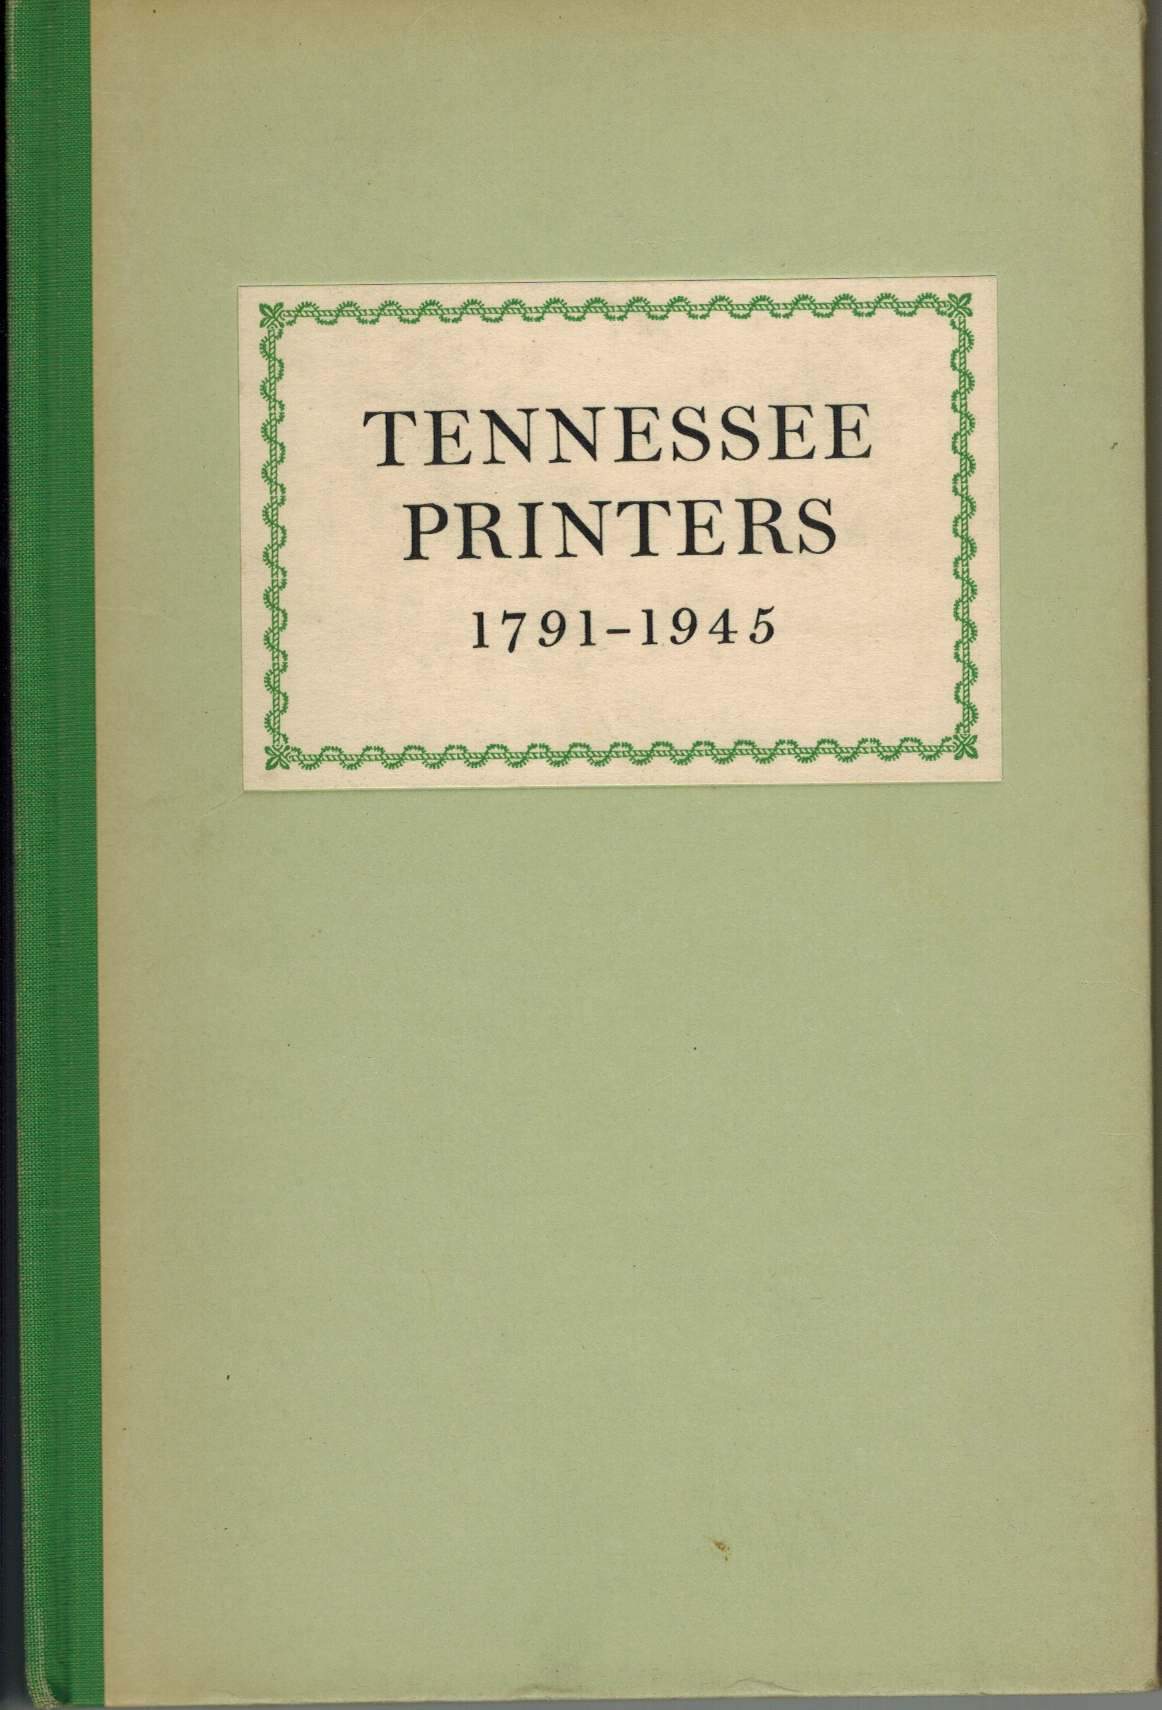 Tennessee printers, 1791-1945  A review of printing history from  Roulstone's first press to printers of the present - books-new